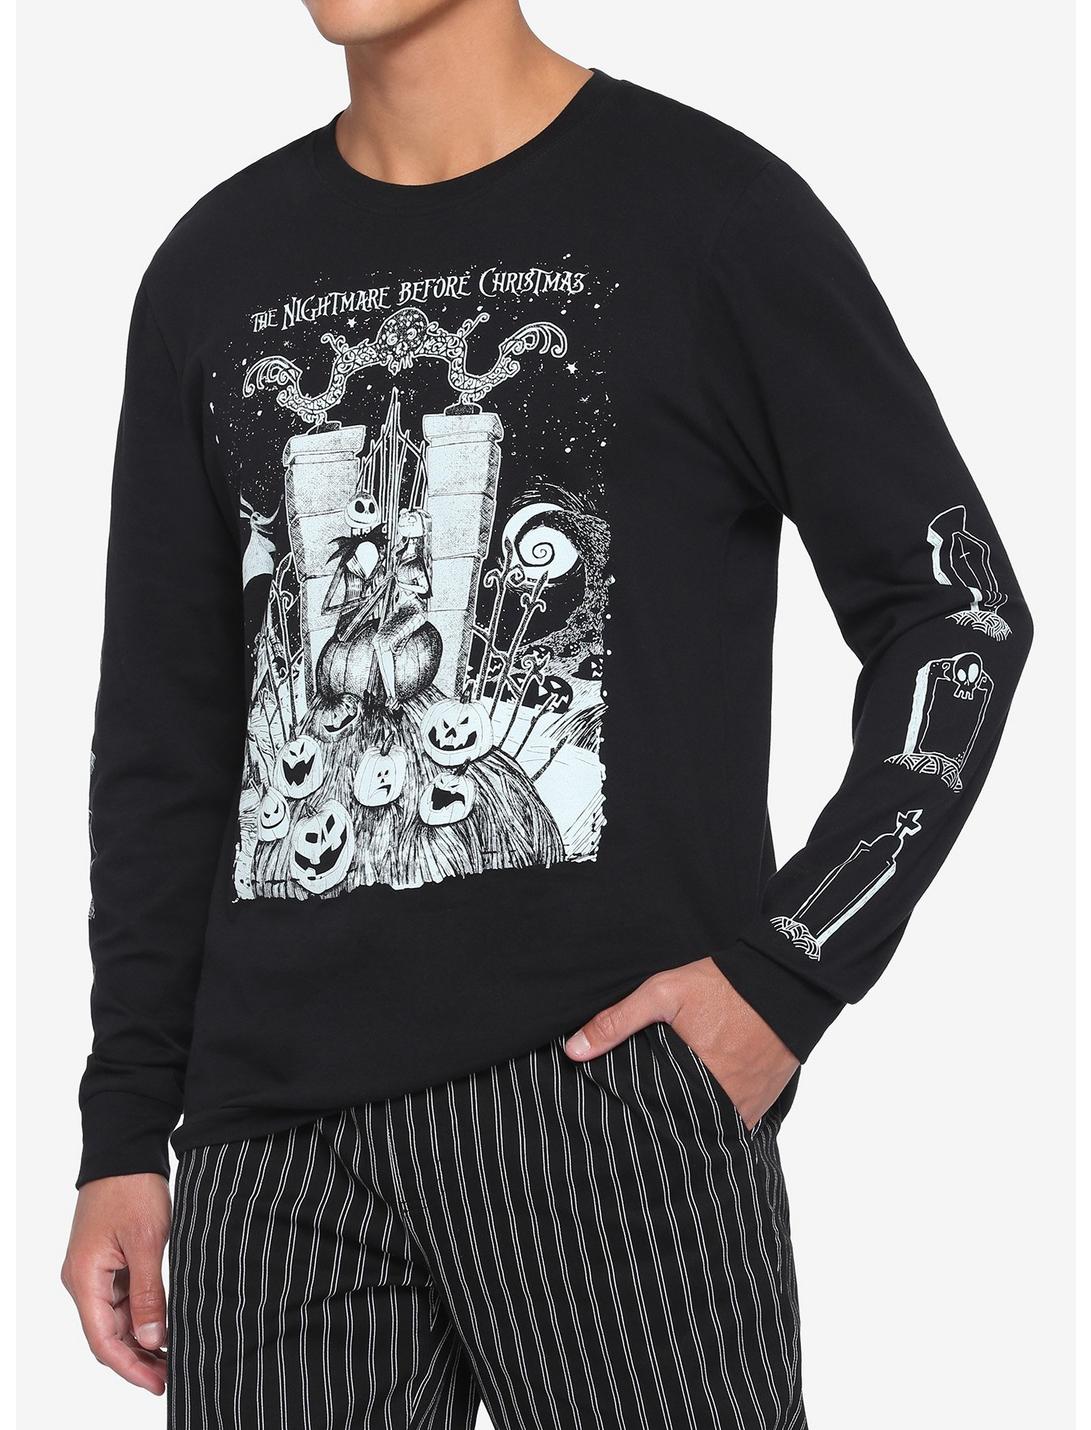 The Nightmare Before Christmas Halloween Town Gates Long-Sleeve T-Shirt, BLACK, hi-res